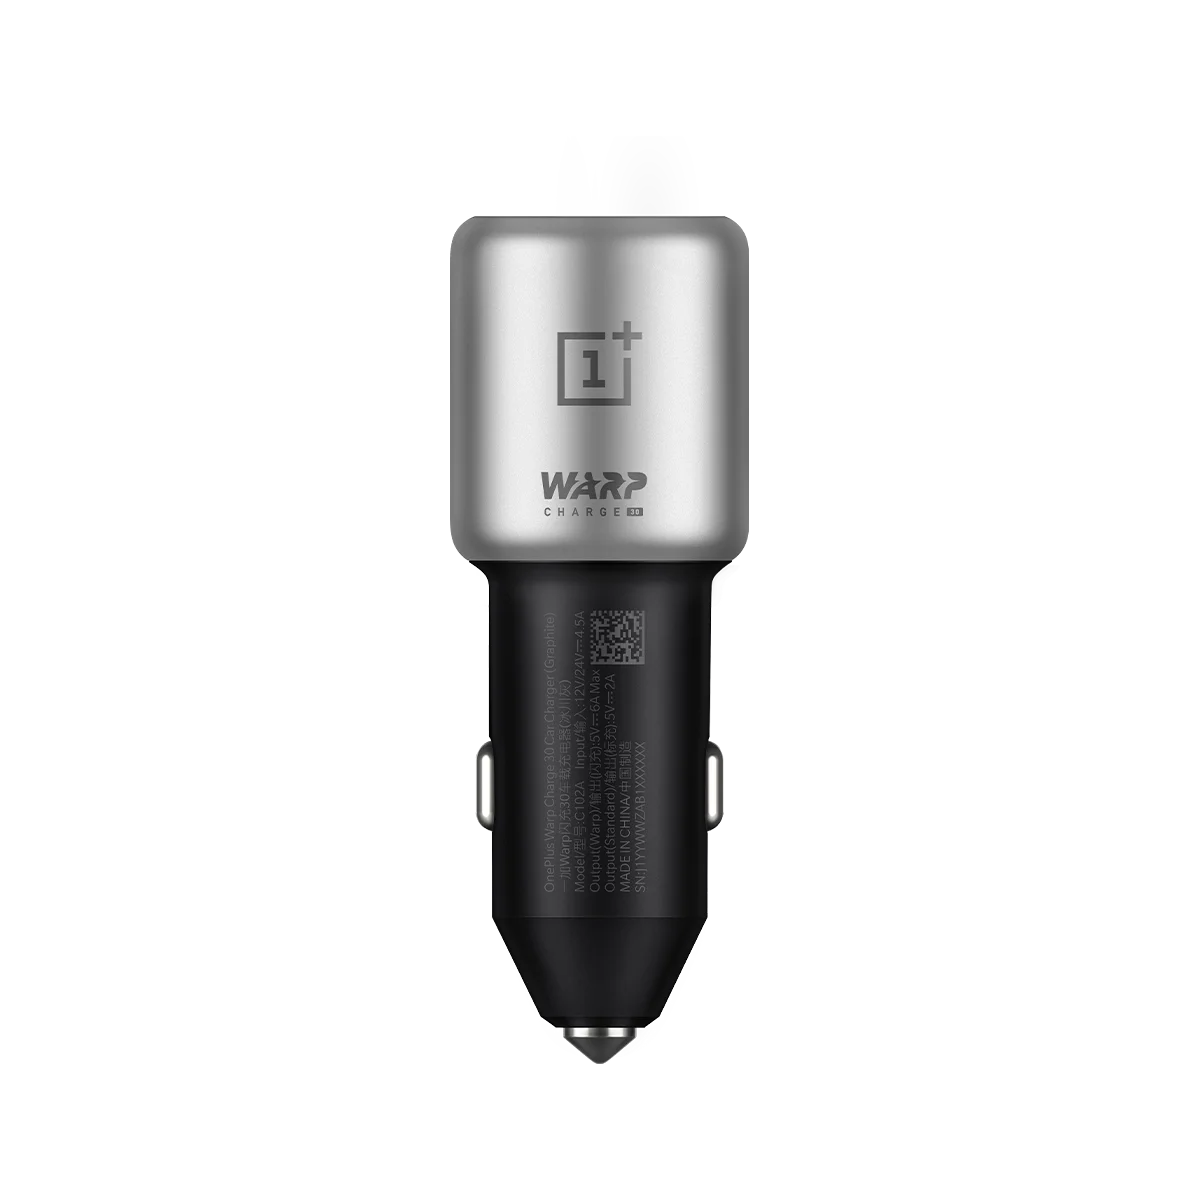 c102a original oneplus warp charge 30w car charger 5v 6a for oneplus 9 pro 9r 8t 8 pro 7t pro 7 pro 6t 6 5t 5 free global shipping